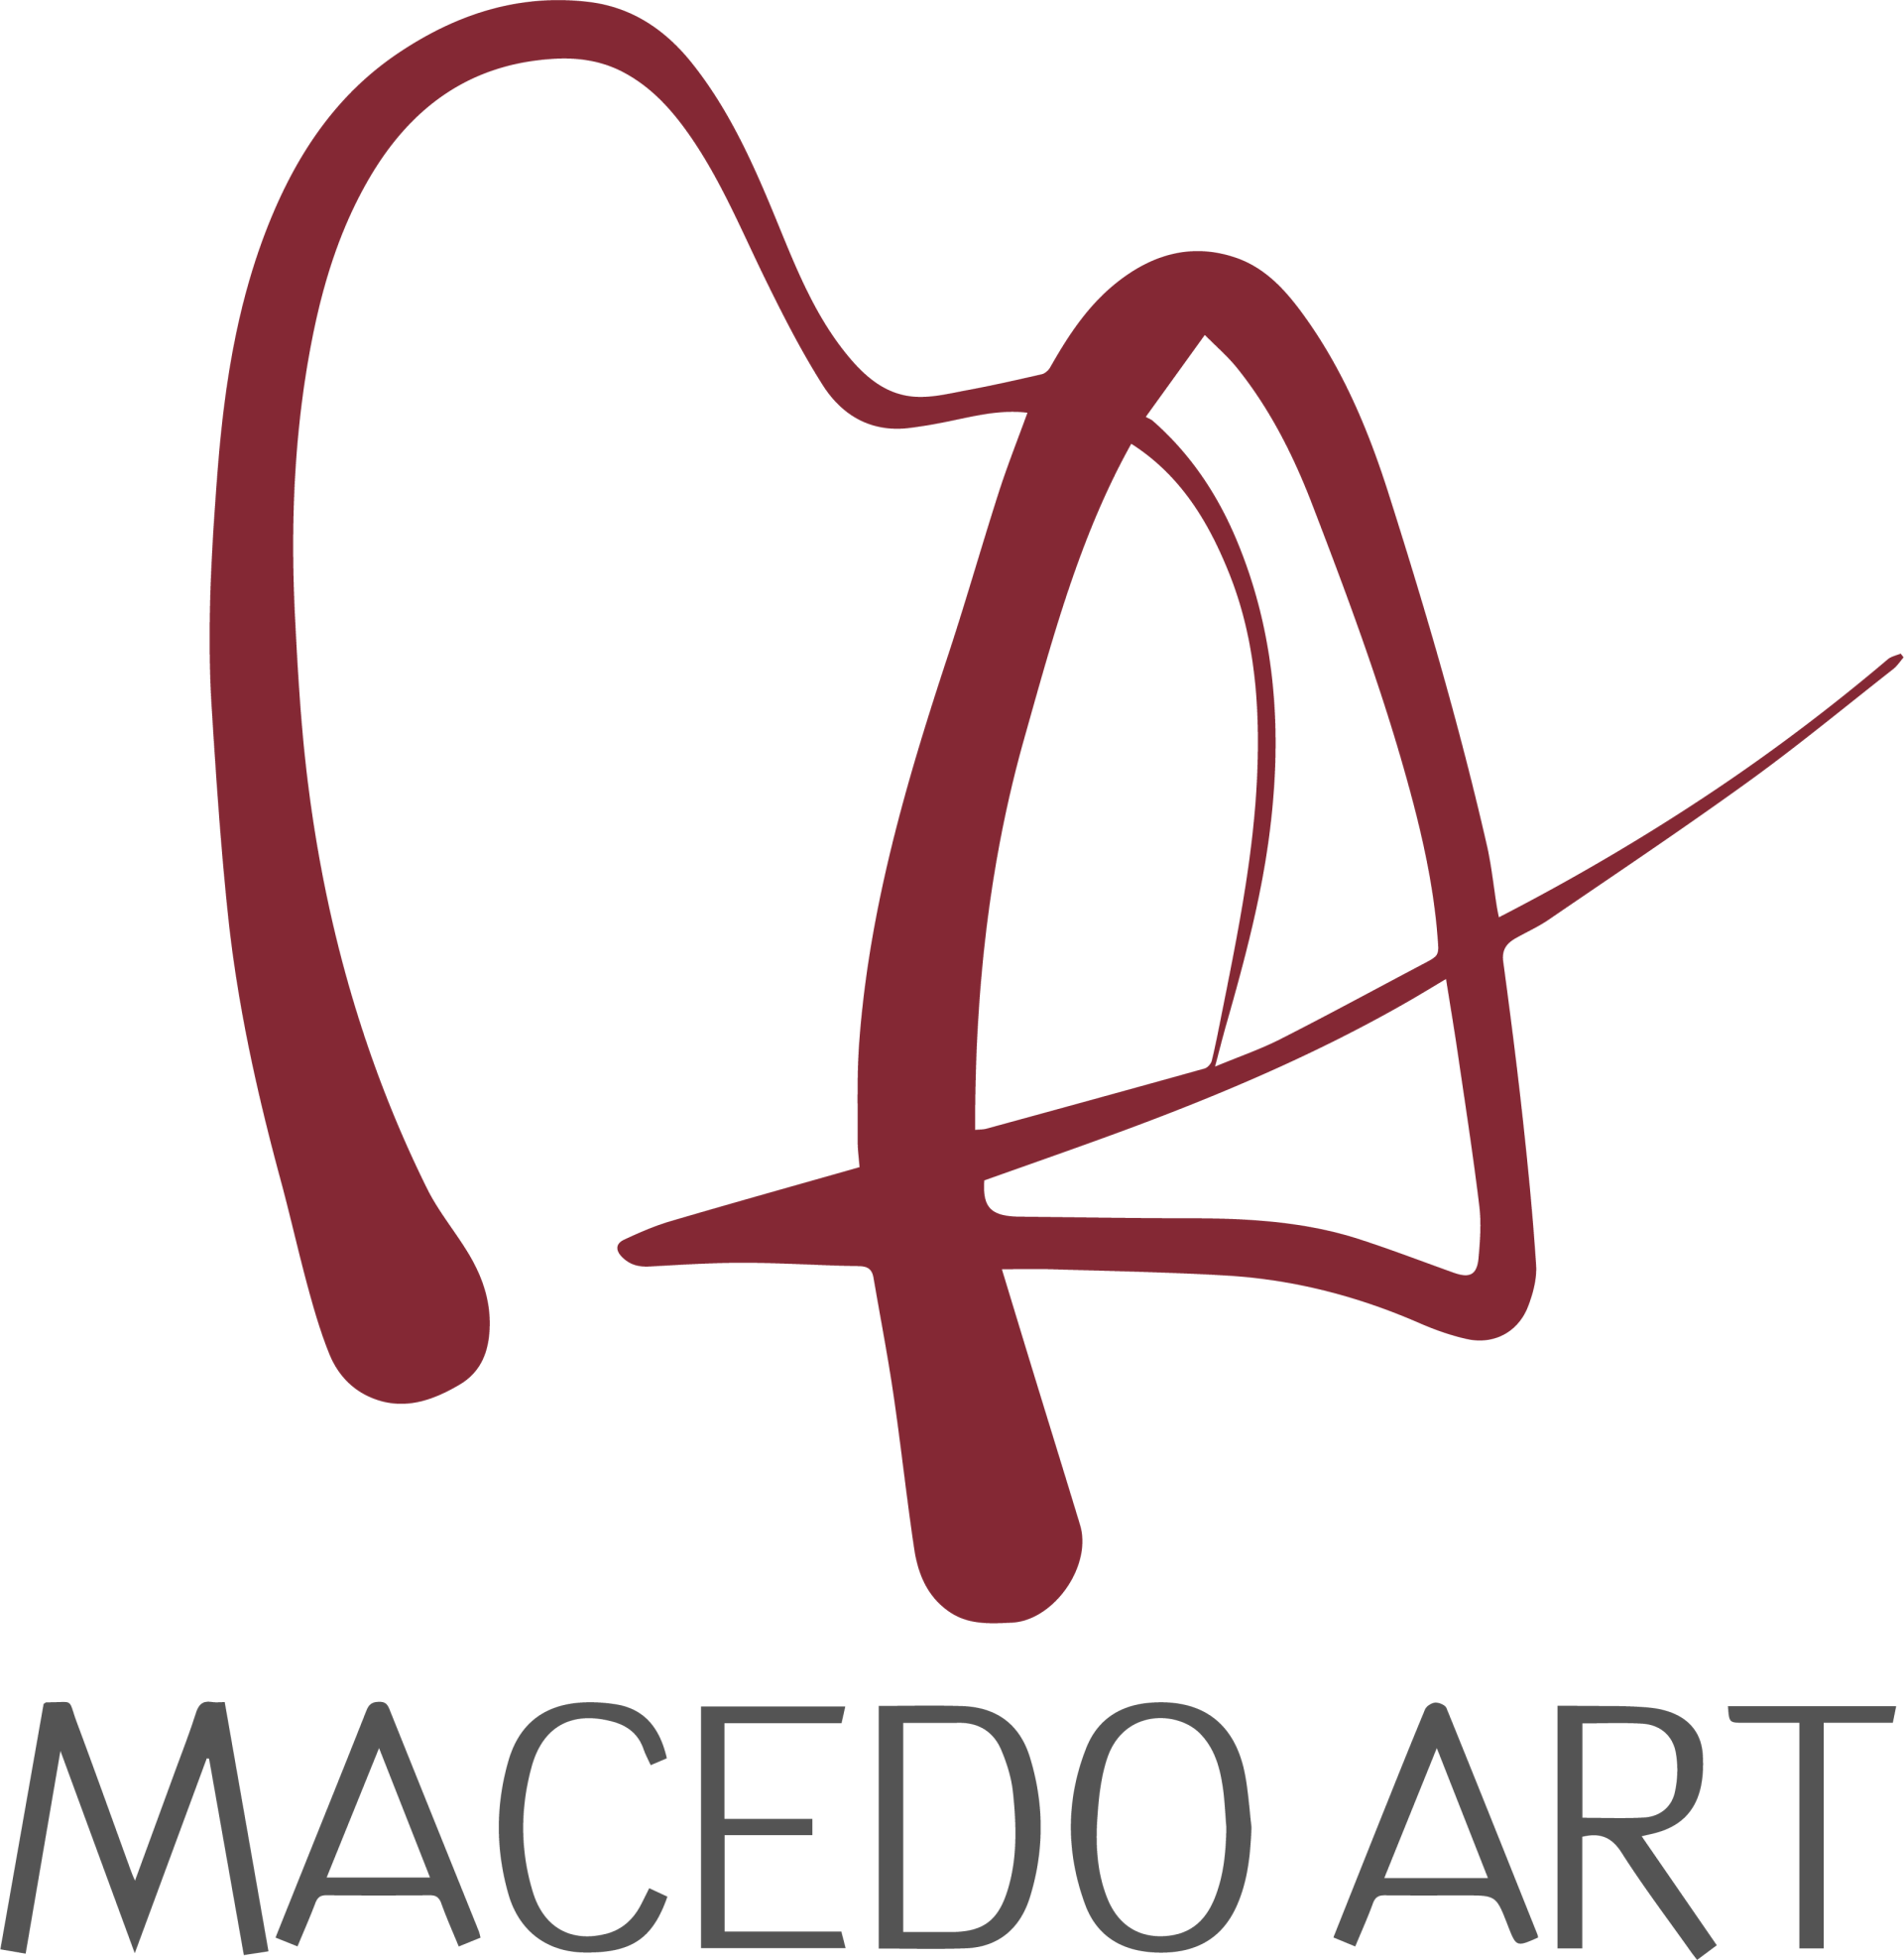 A Macedo Art logo with a red letter M and A